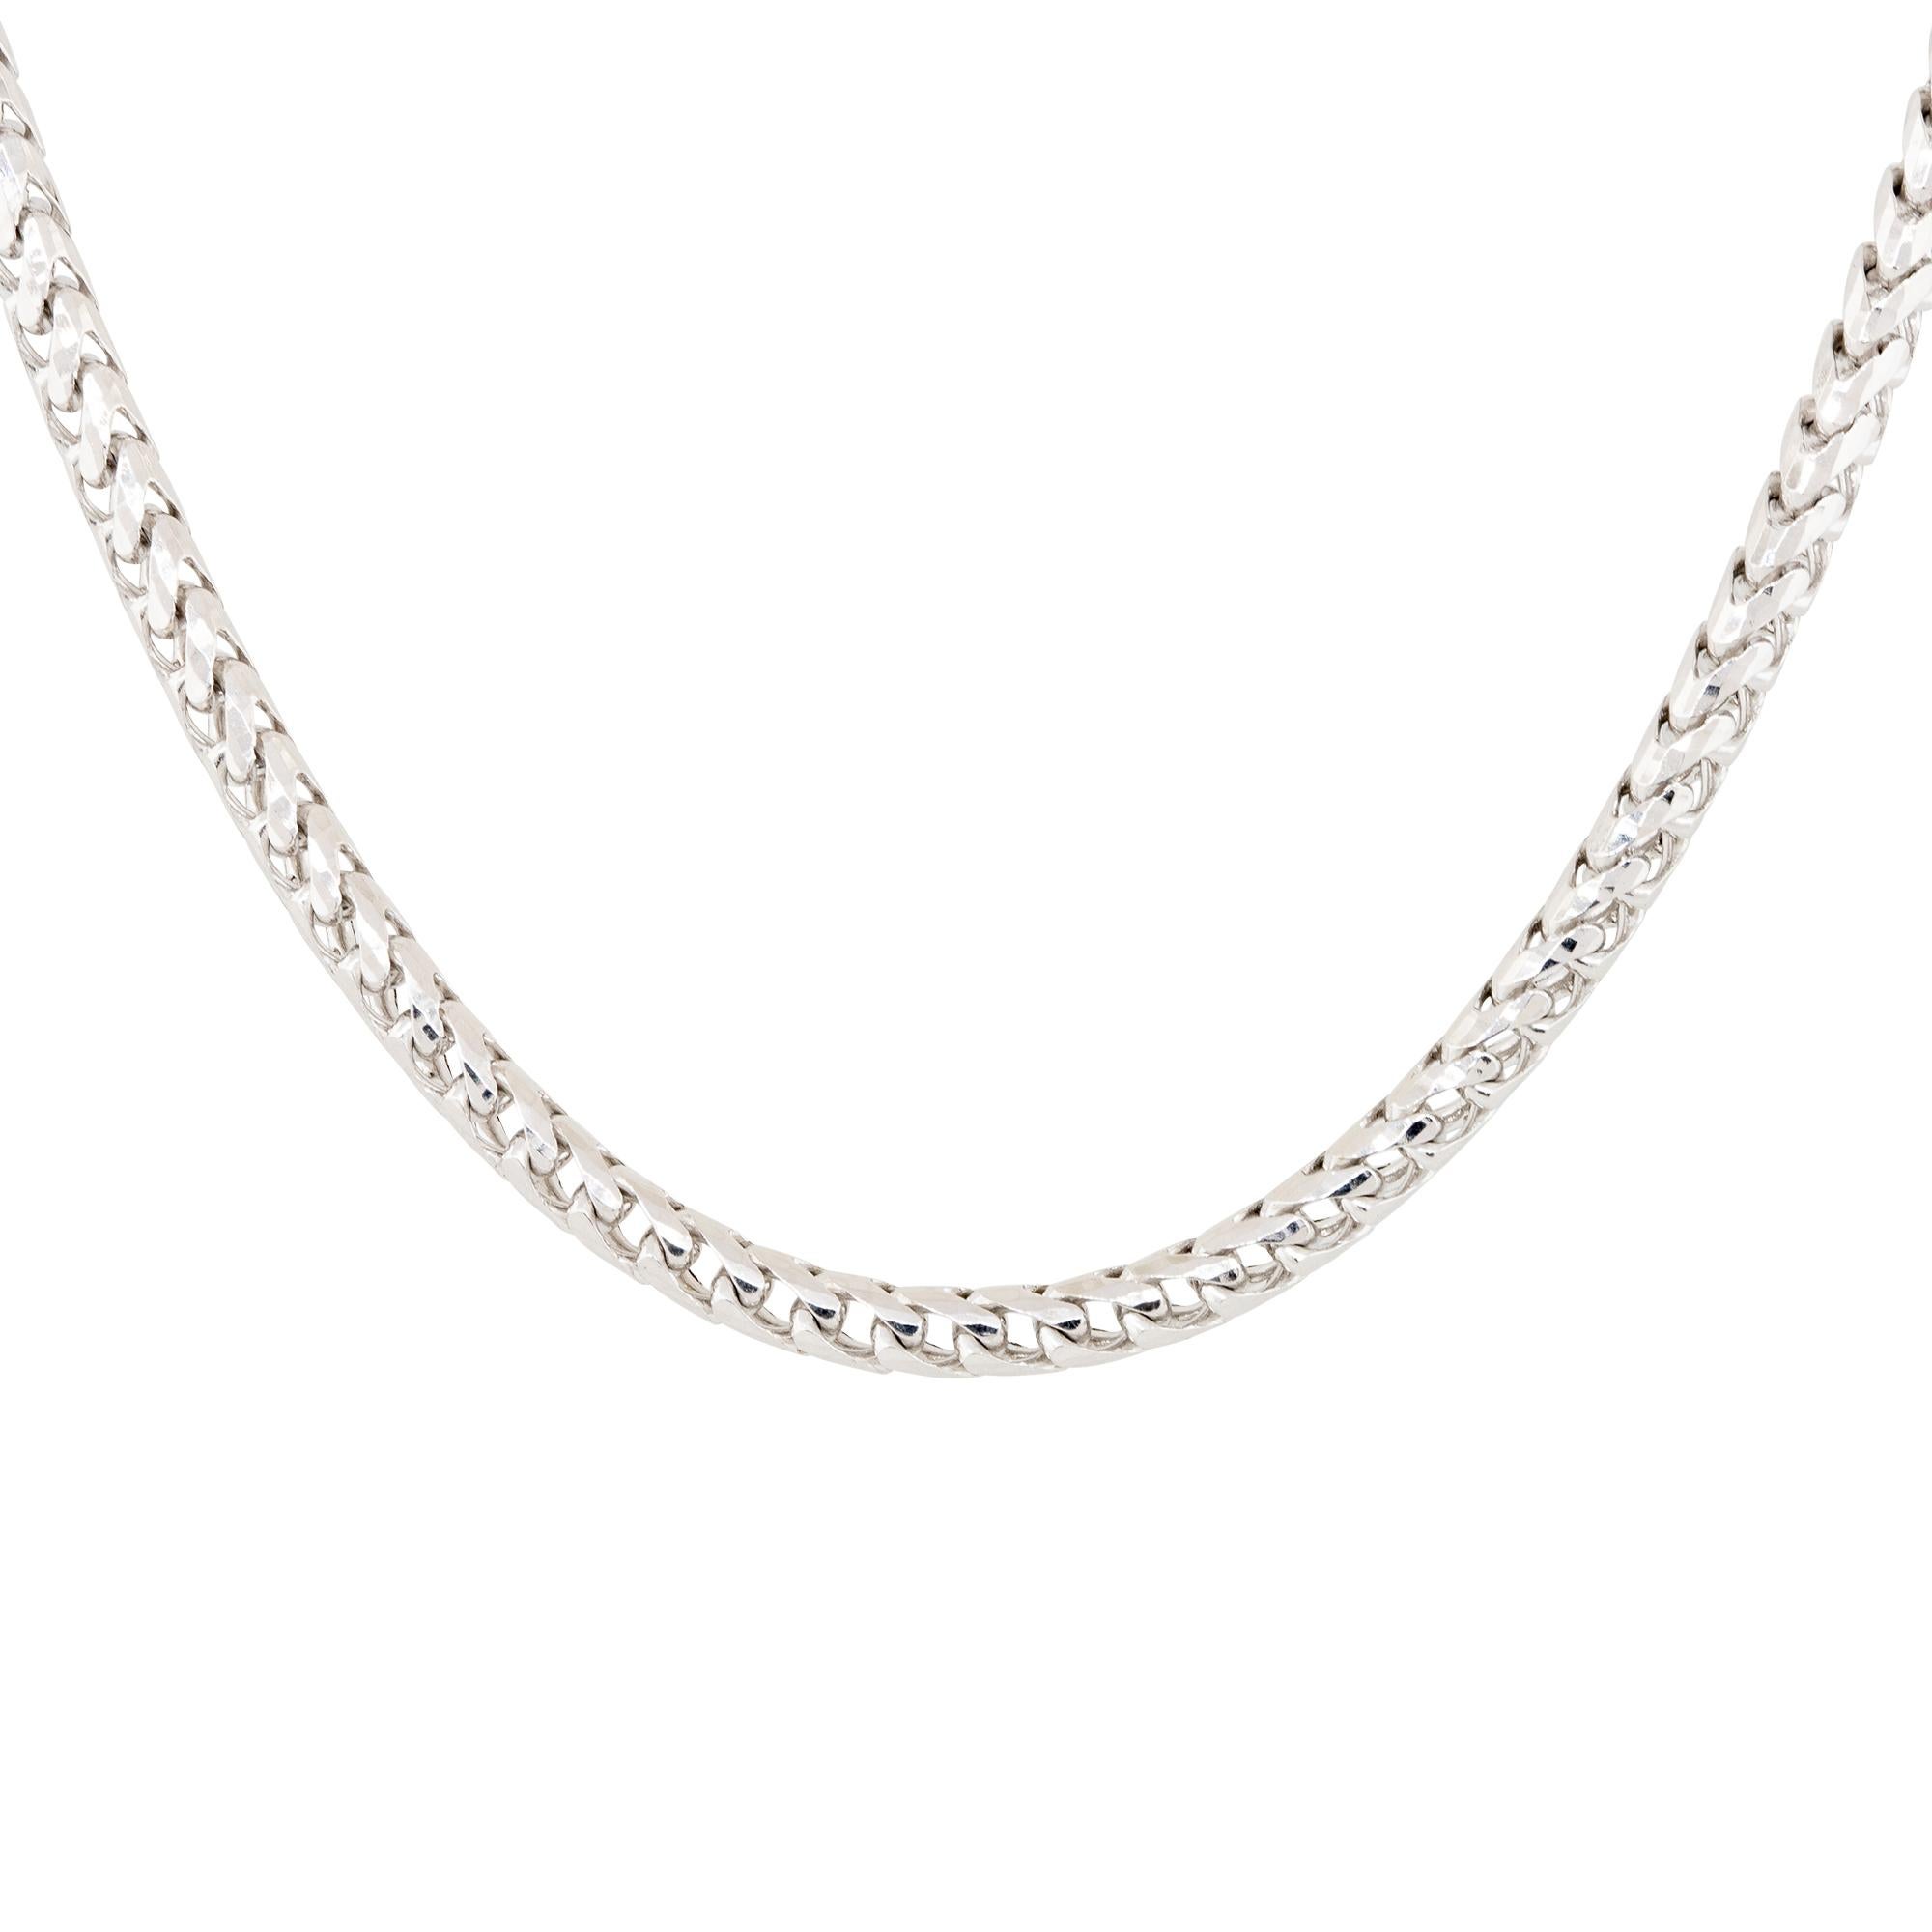 10k White Gold 22″ Men’s 4mm Franco Chain

Material: 10k White Gold
Measurements: Necklace Measures 22″ in Length and 4mm in Thickness
Fastening: Spring Ring Clasp
Item Weight: 41.37g (26.6dwt)
Additional Details: This item comes with a presentation